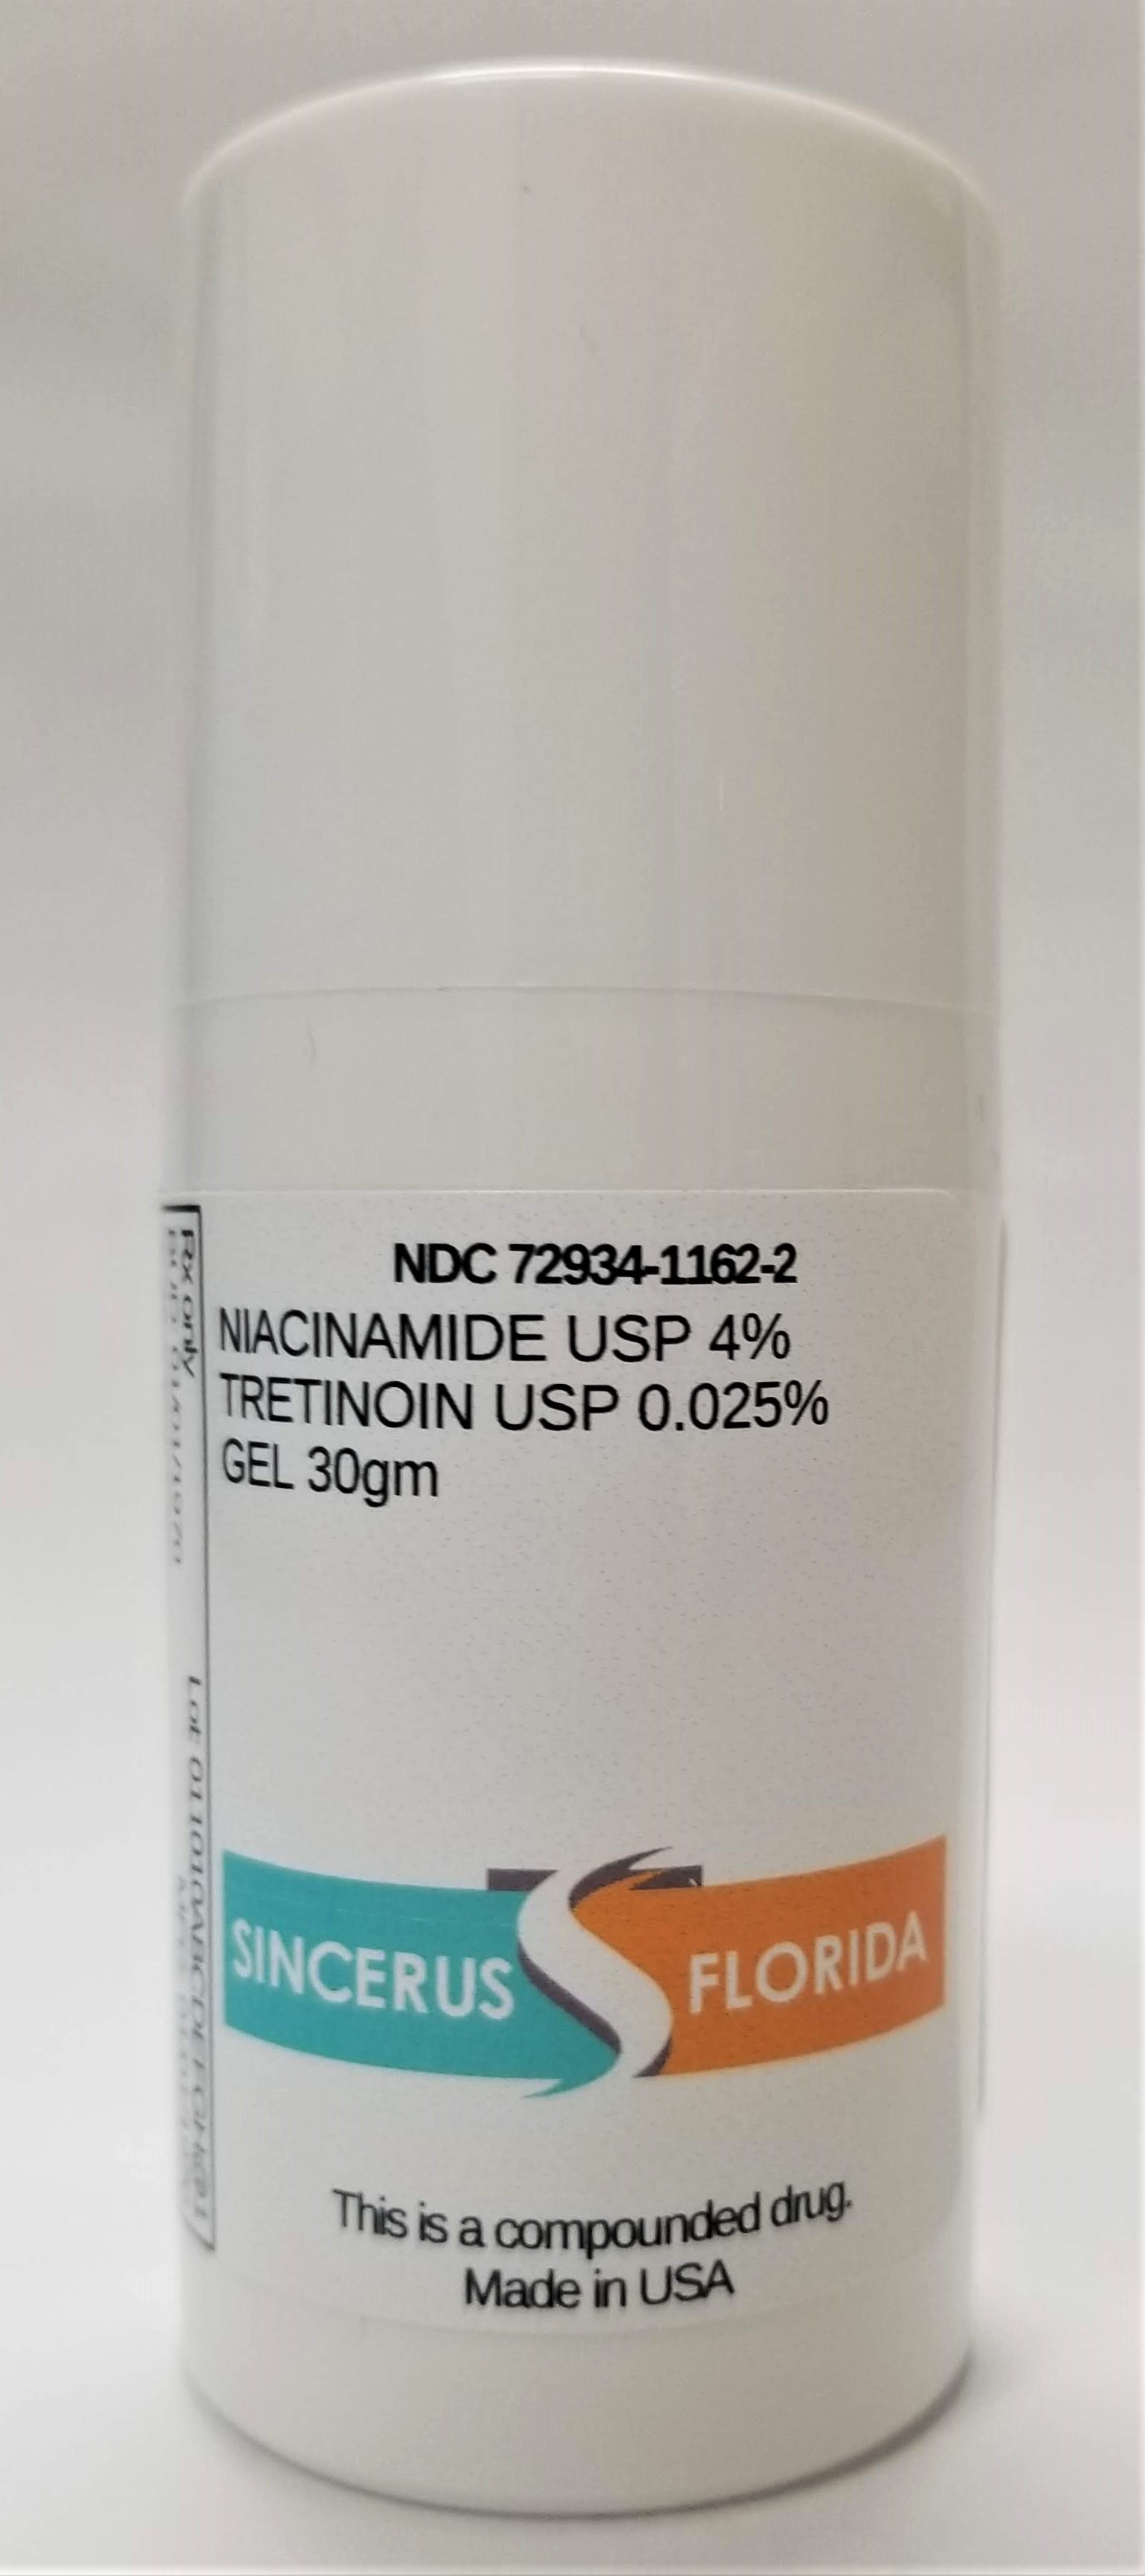 NDC 72934-1162-2 NIACINAMIDE 4 / TRETINOIN 0.025 Cream 30gm Sincerus Florida This is a compound drug Made in USA